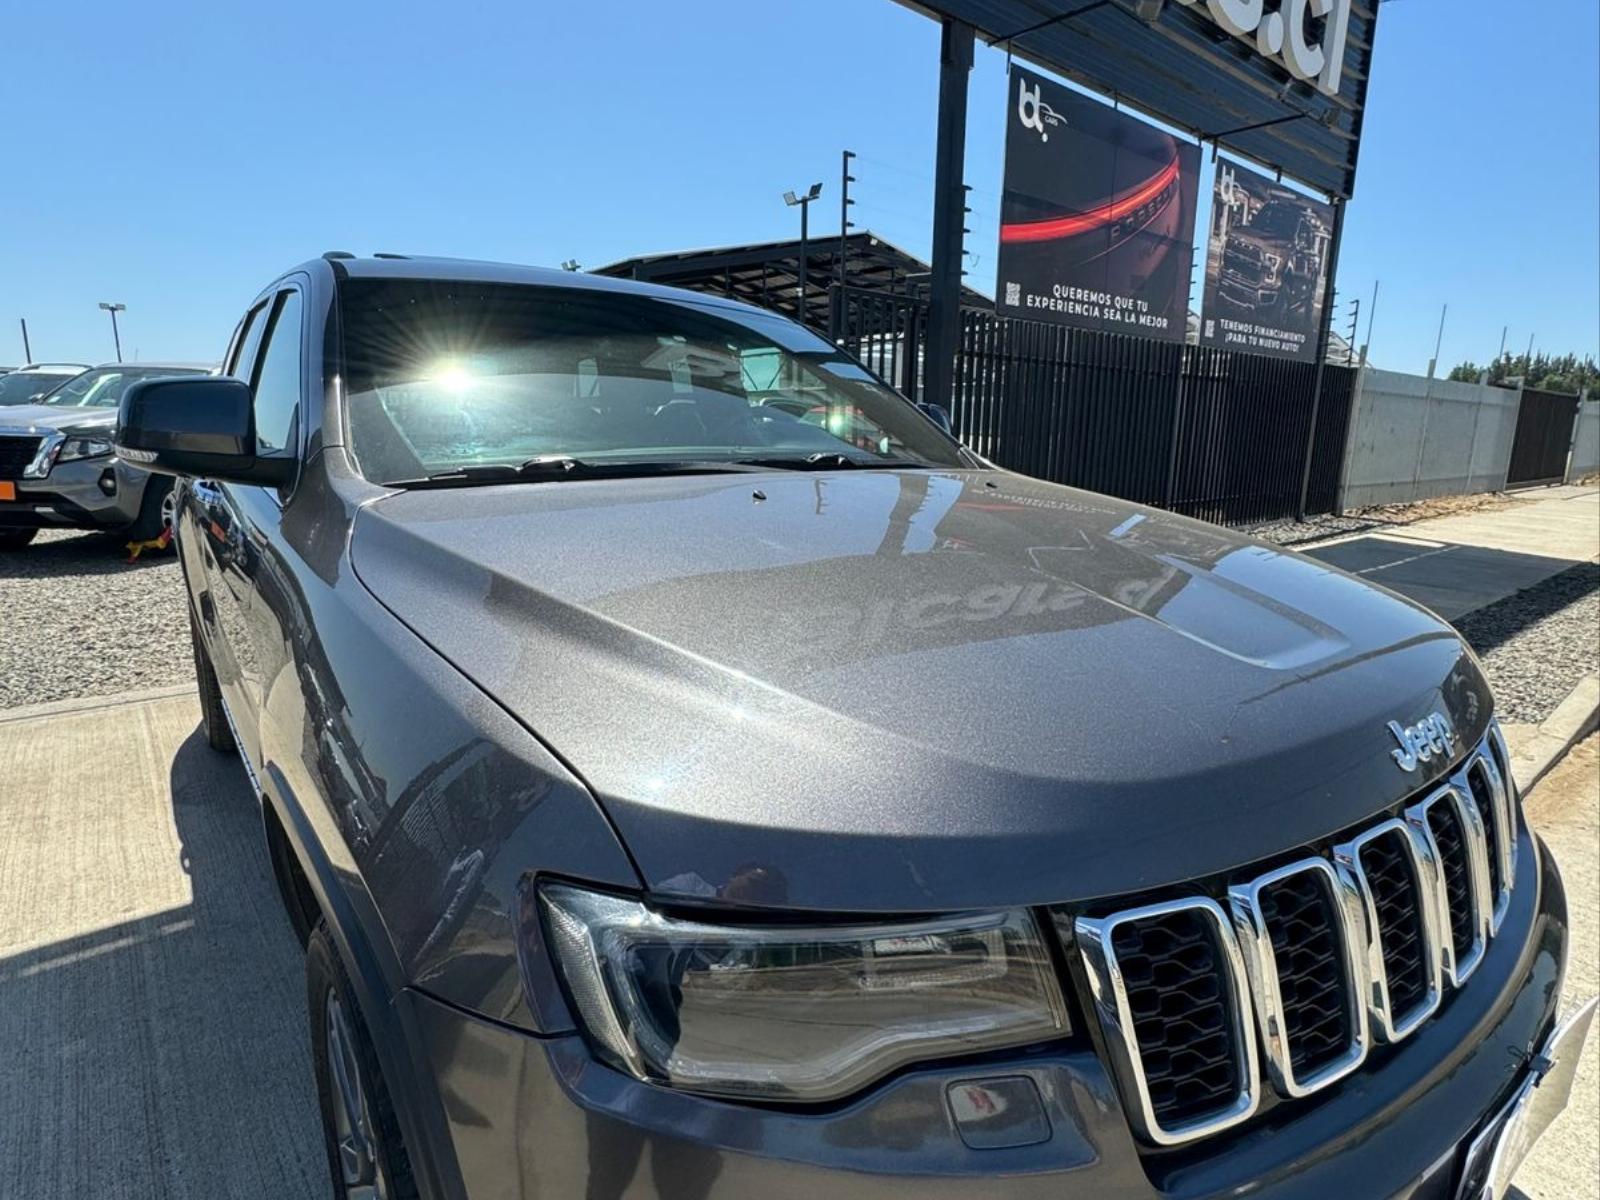 JEEP CHEROKEE LIMITED 2019 Impecable , Mantenimientos al dia  - FULL MOTOR